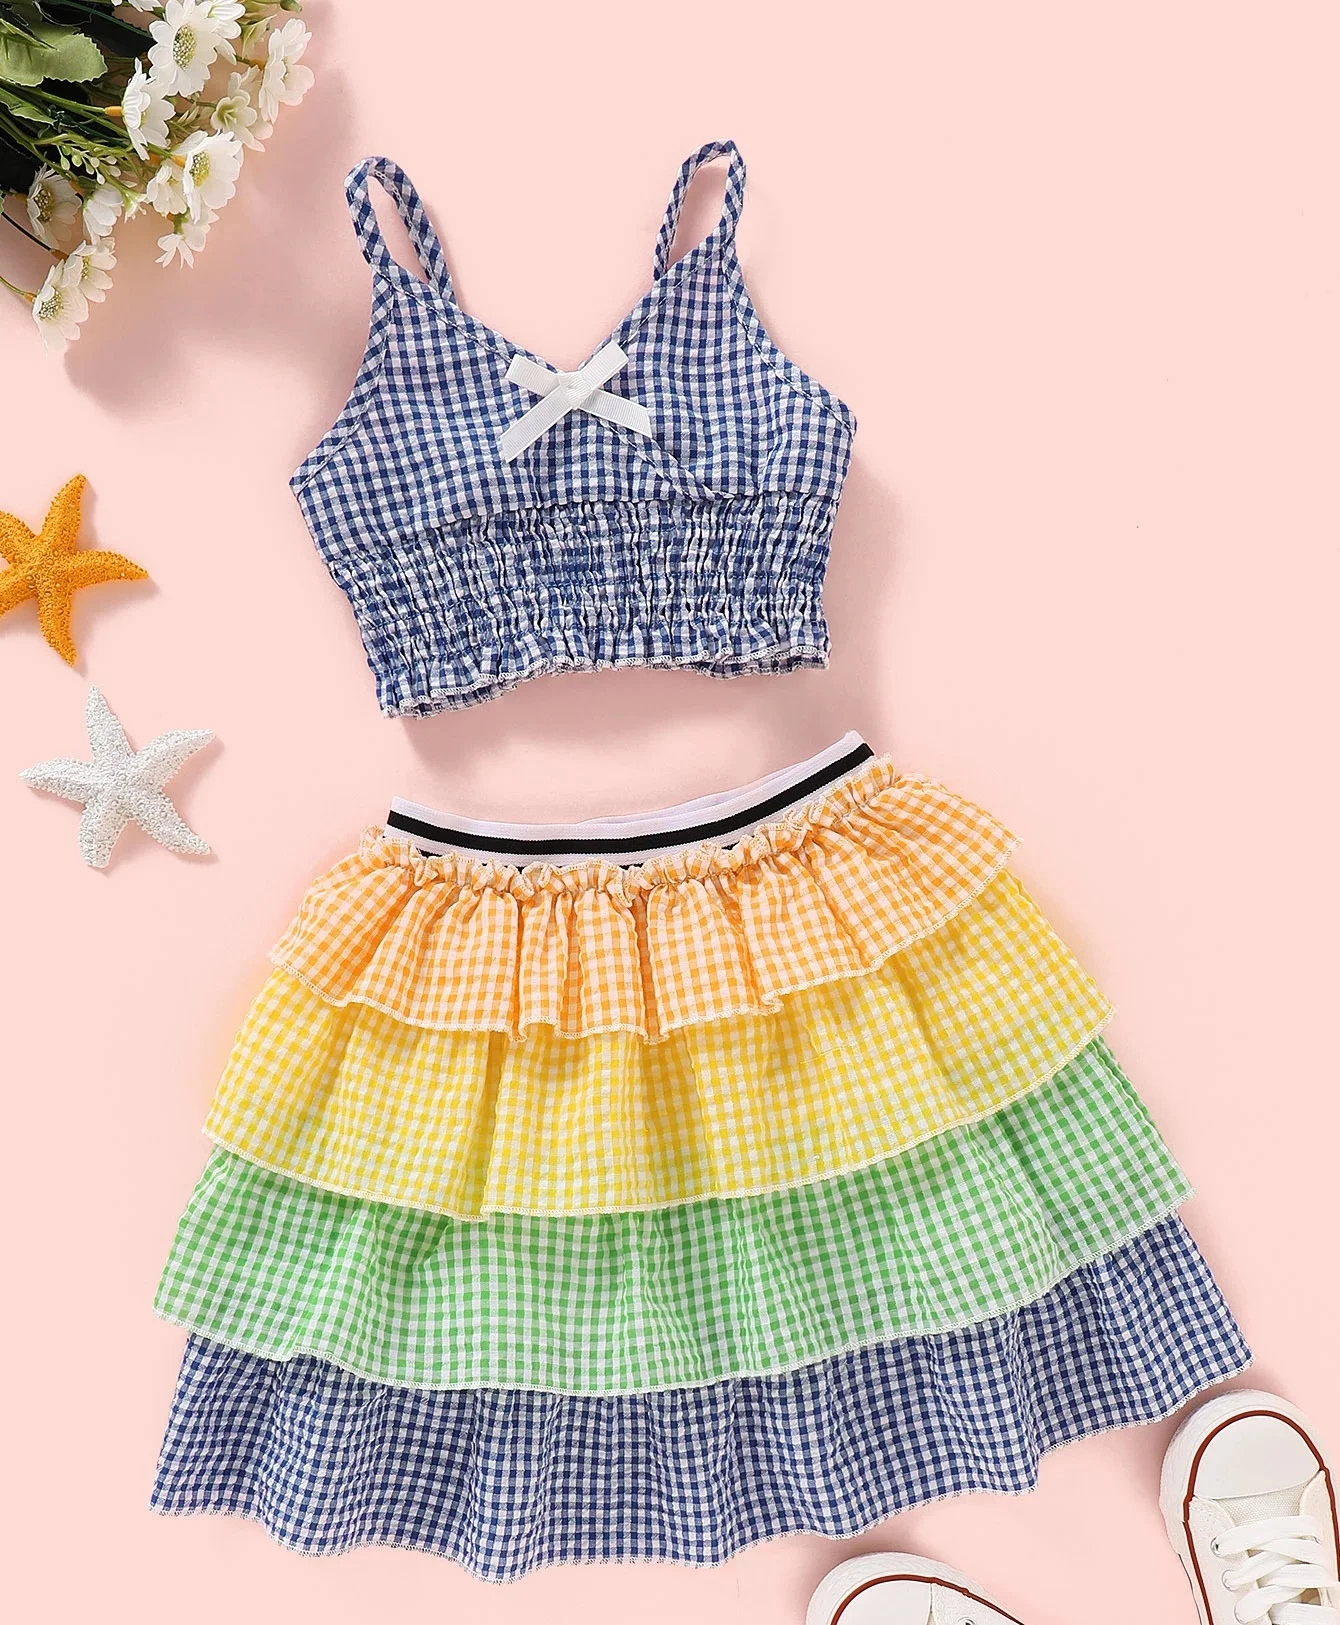 

New fashion Toddler Girls Clothing set ruffled summer sleeveless plaid top and layered rainbow skirt set clothing for kids, Picture shows